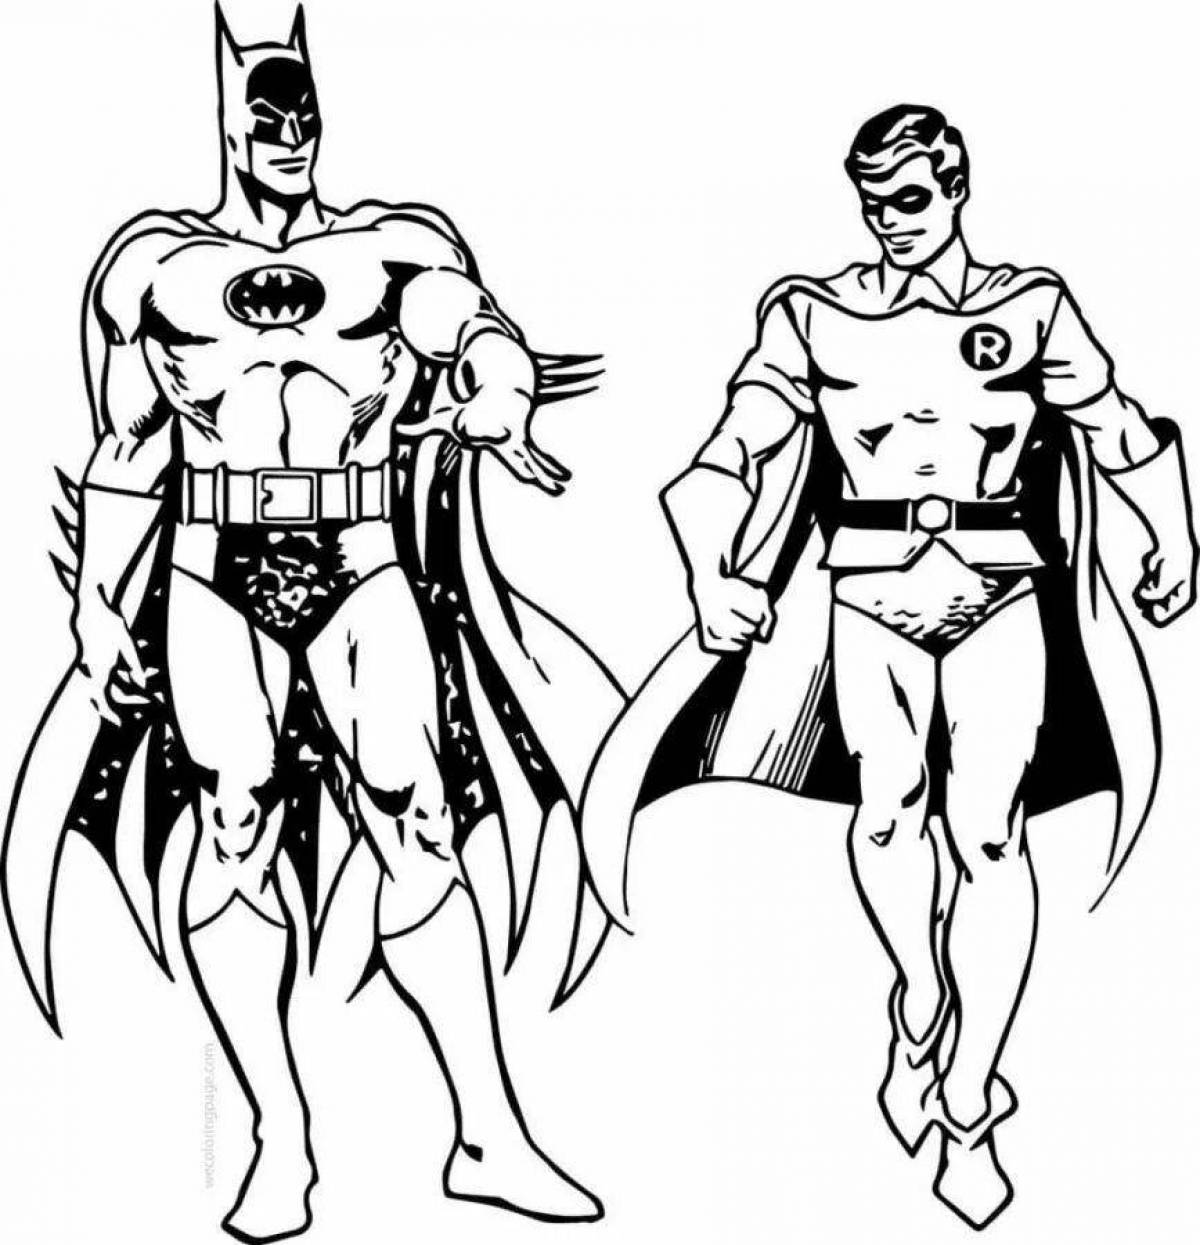 Brave batman and spiderman coloring pages